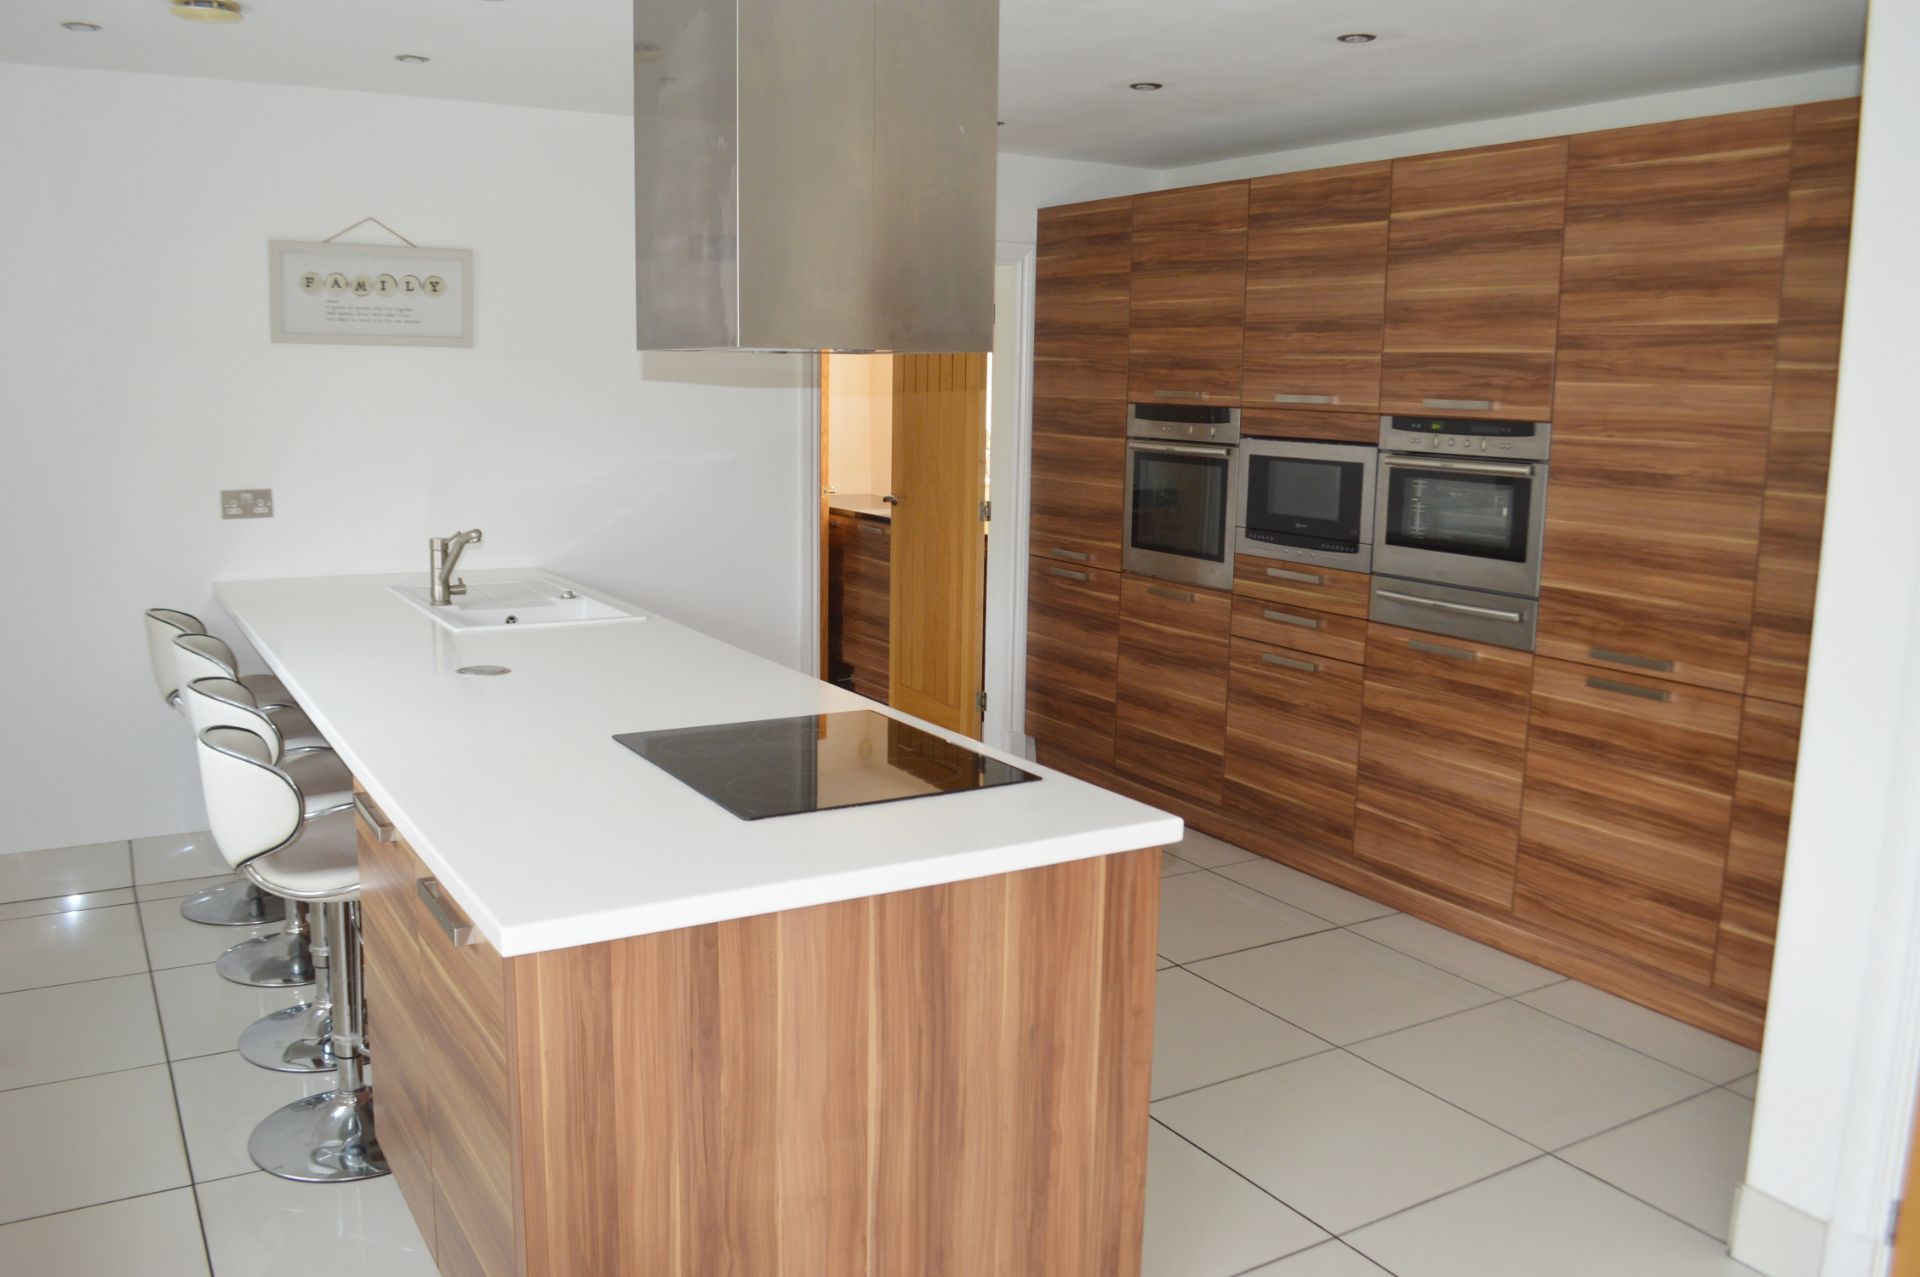 1 x Contemporary Bespoke Fitted Kitchen With Neff Branded Appliances - Collection Date: 1st November - Image 46 of 52